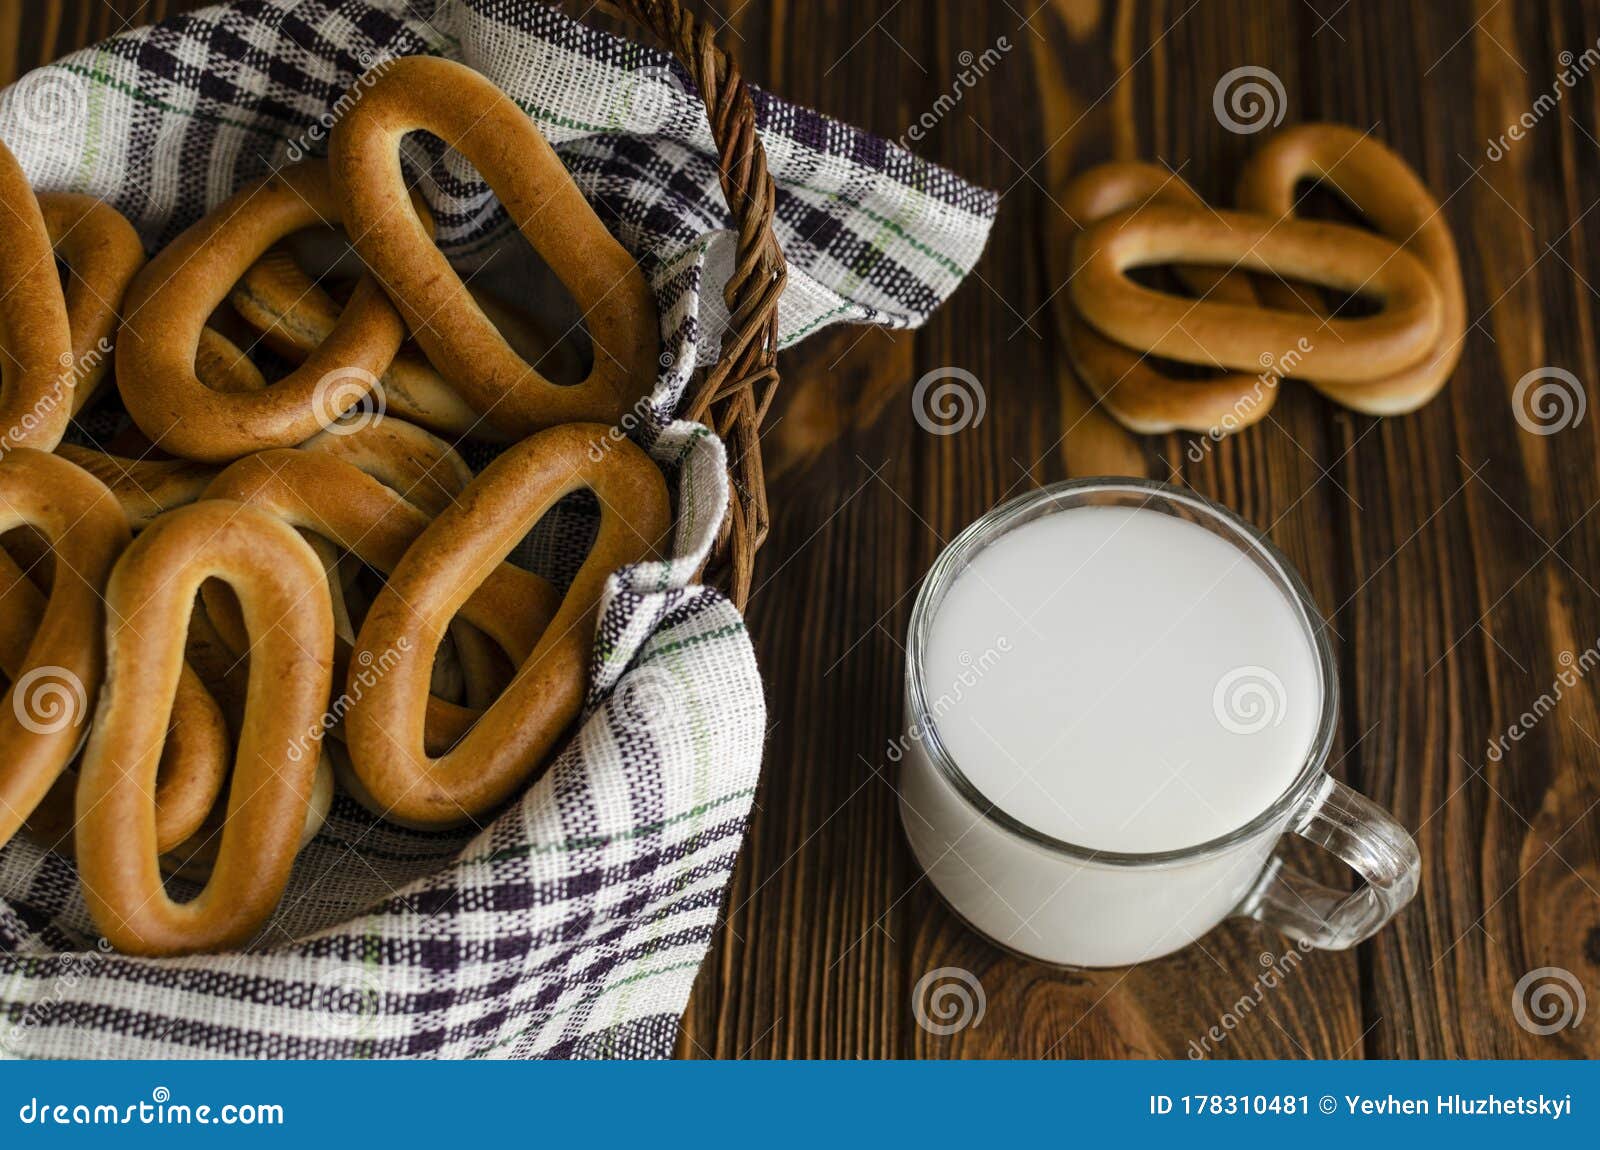 Milk and Bagels on the Countertop Stock Image - Image of basket, view ...